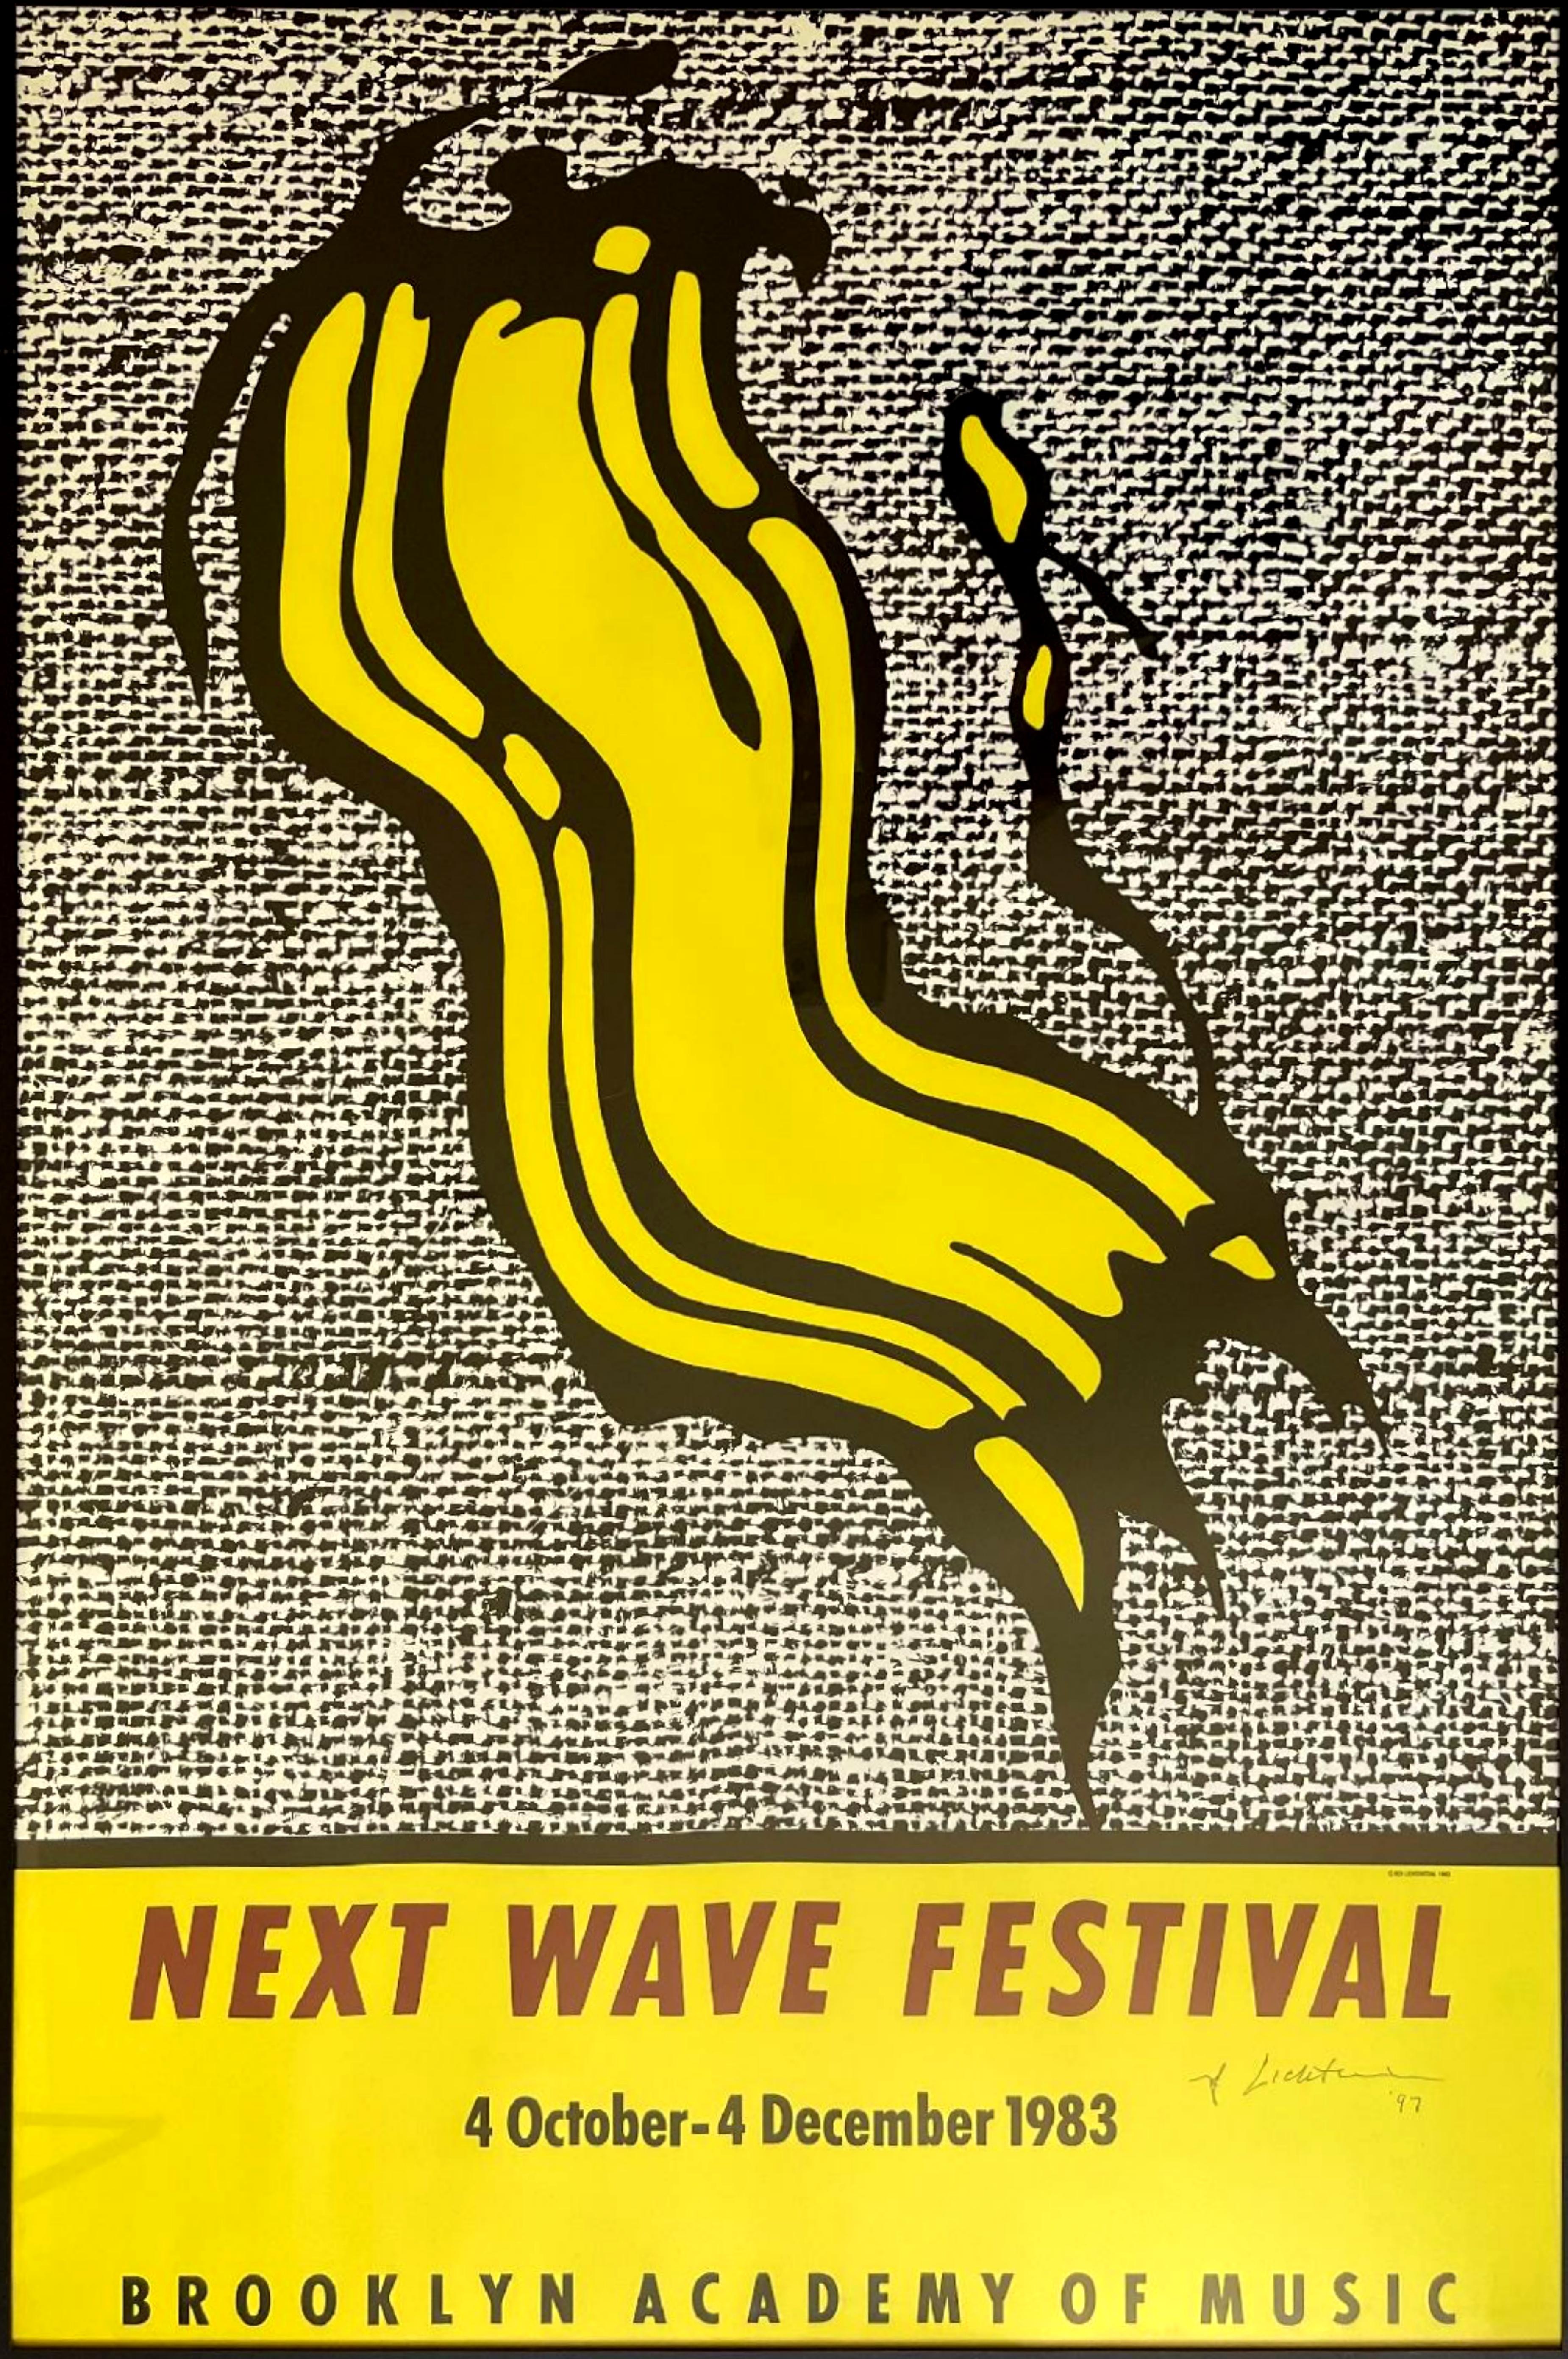 Roy Lichtenstein
Next Wave Festival Poster (Hand signed and dated), 1983
Offset lithograph (Hand signed and dated 1997 by Roy Lichtenstein)
Signed and dated '97 in black ink on the front
Published by Next Wave Production for the Brooklyn Academy of